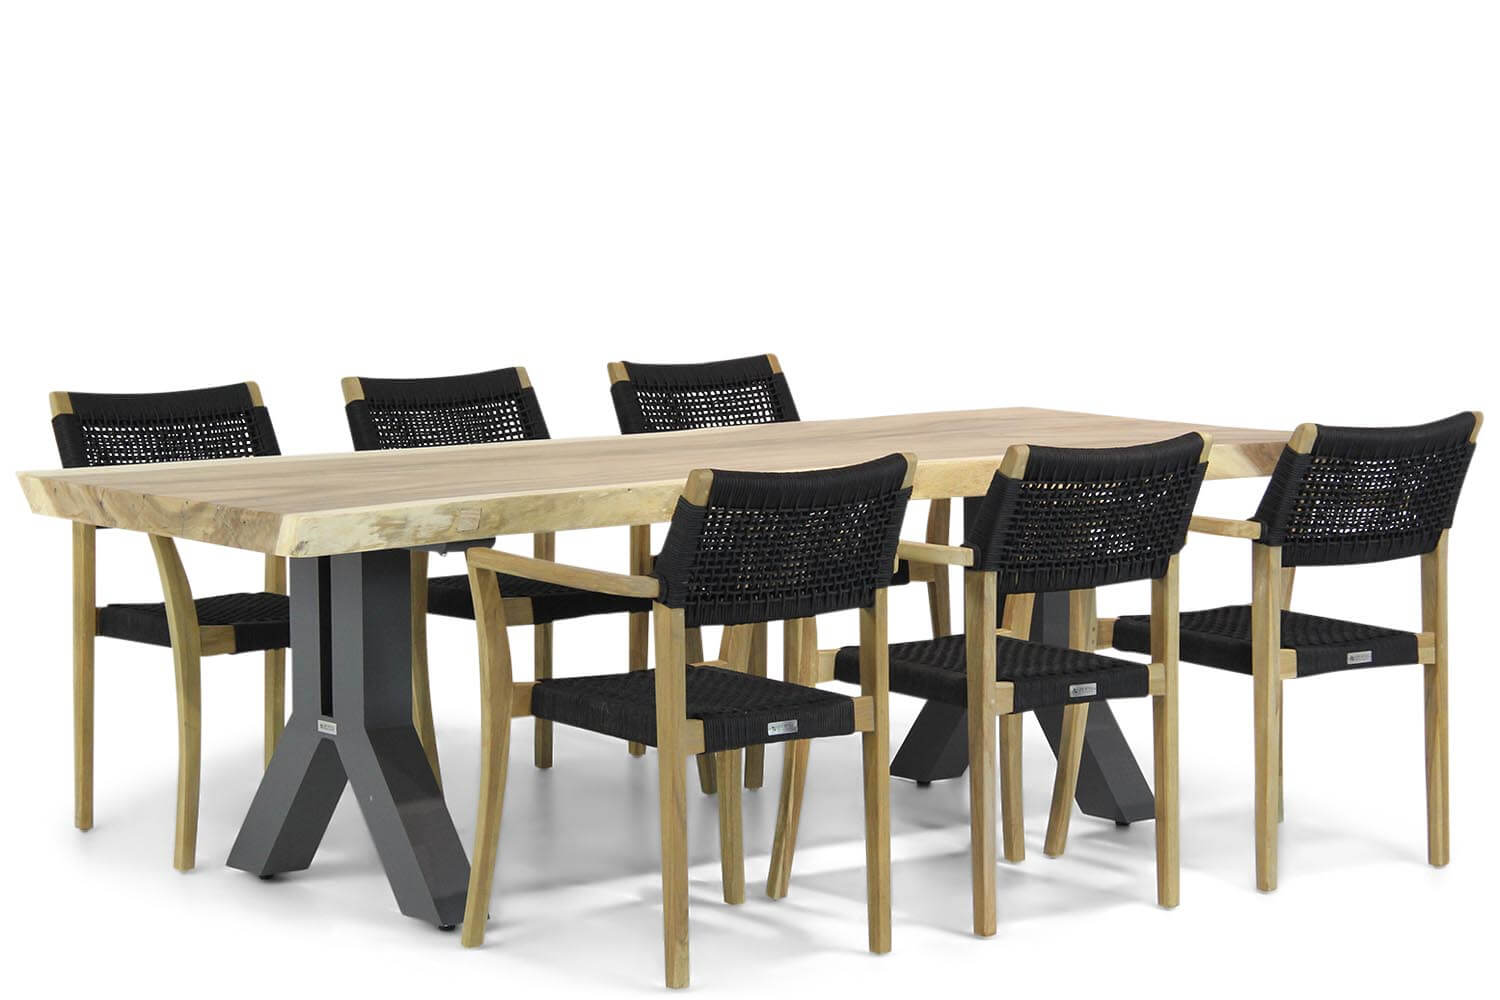 Lifestyle Dallas/Woodside 240 cm dining tuinset 7-delig